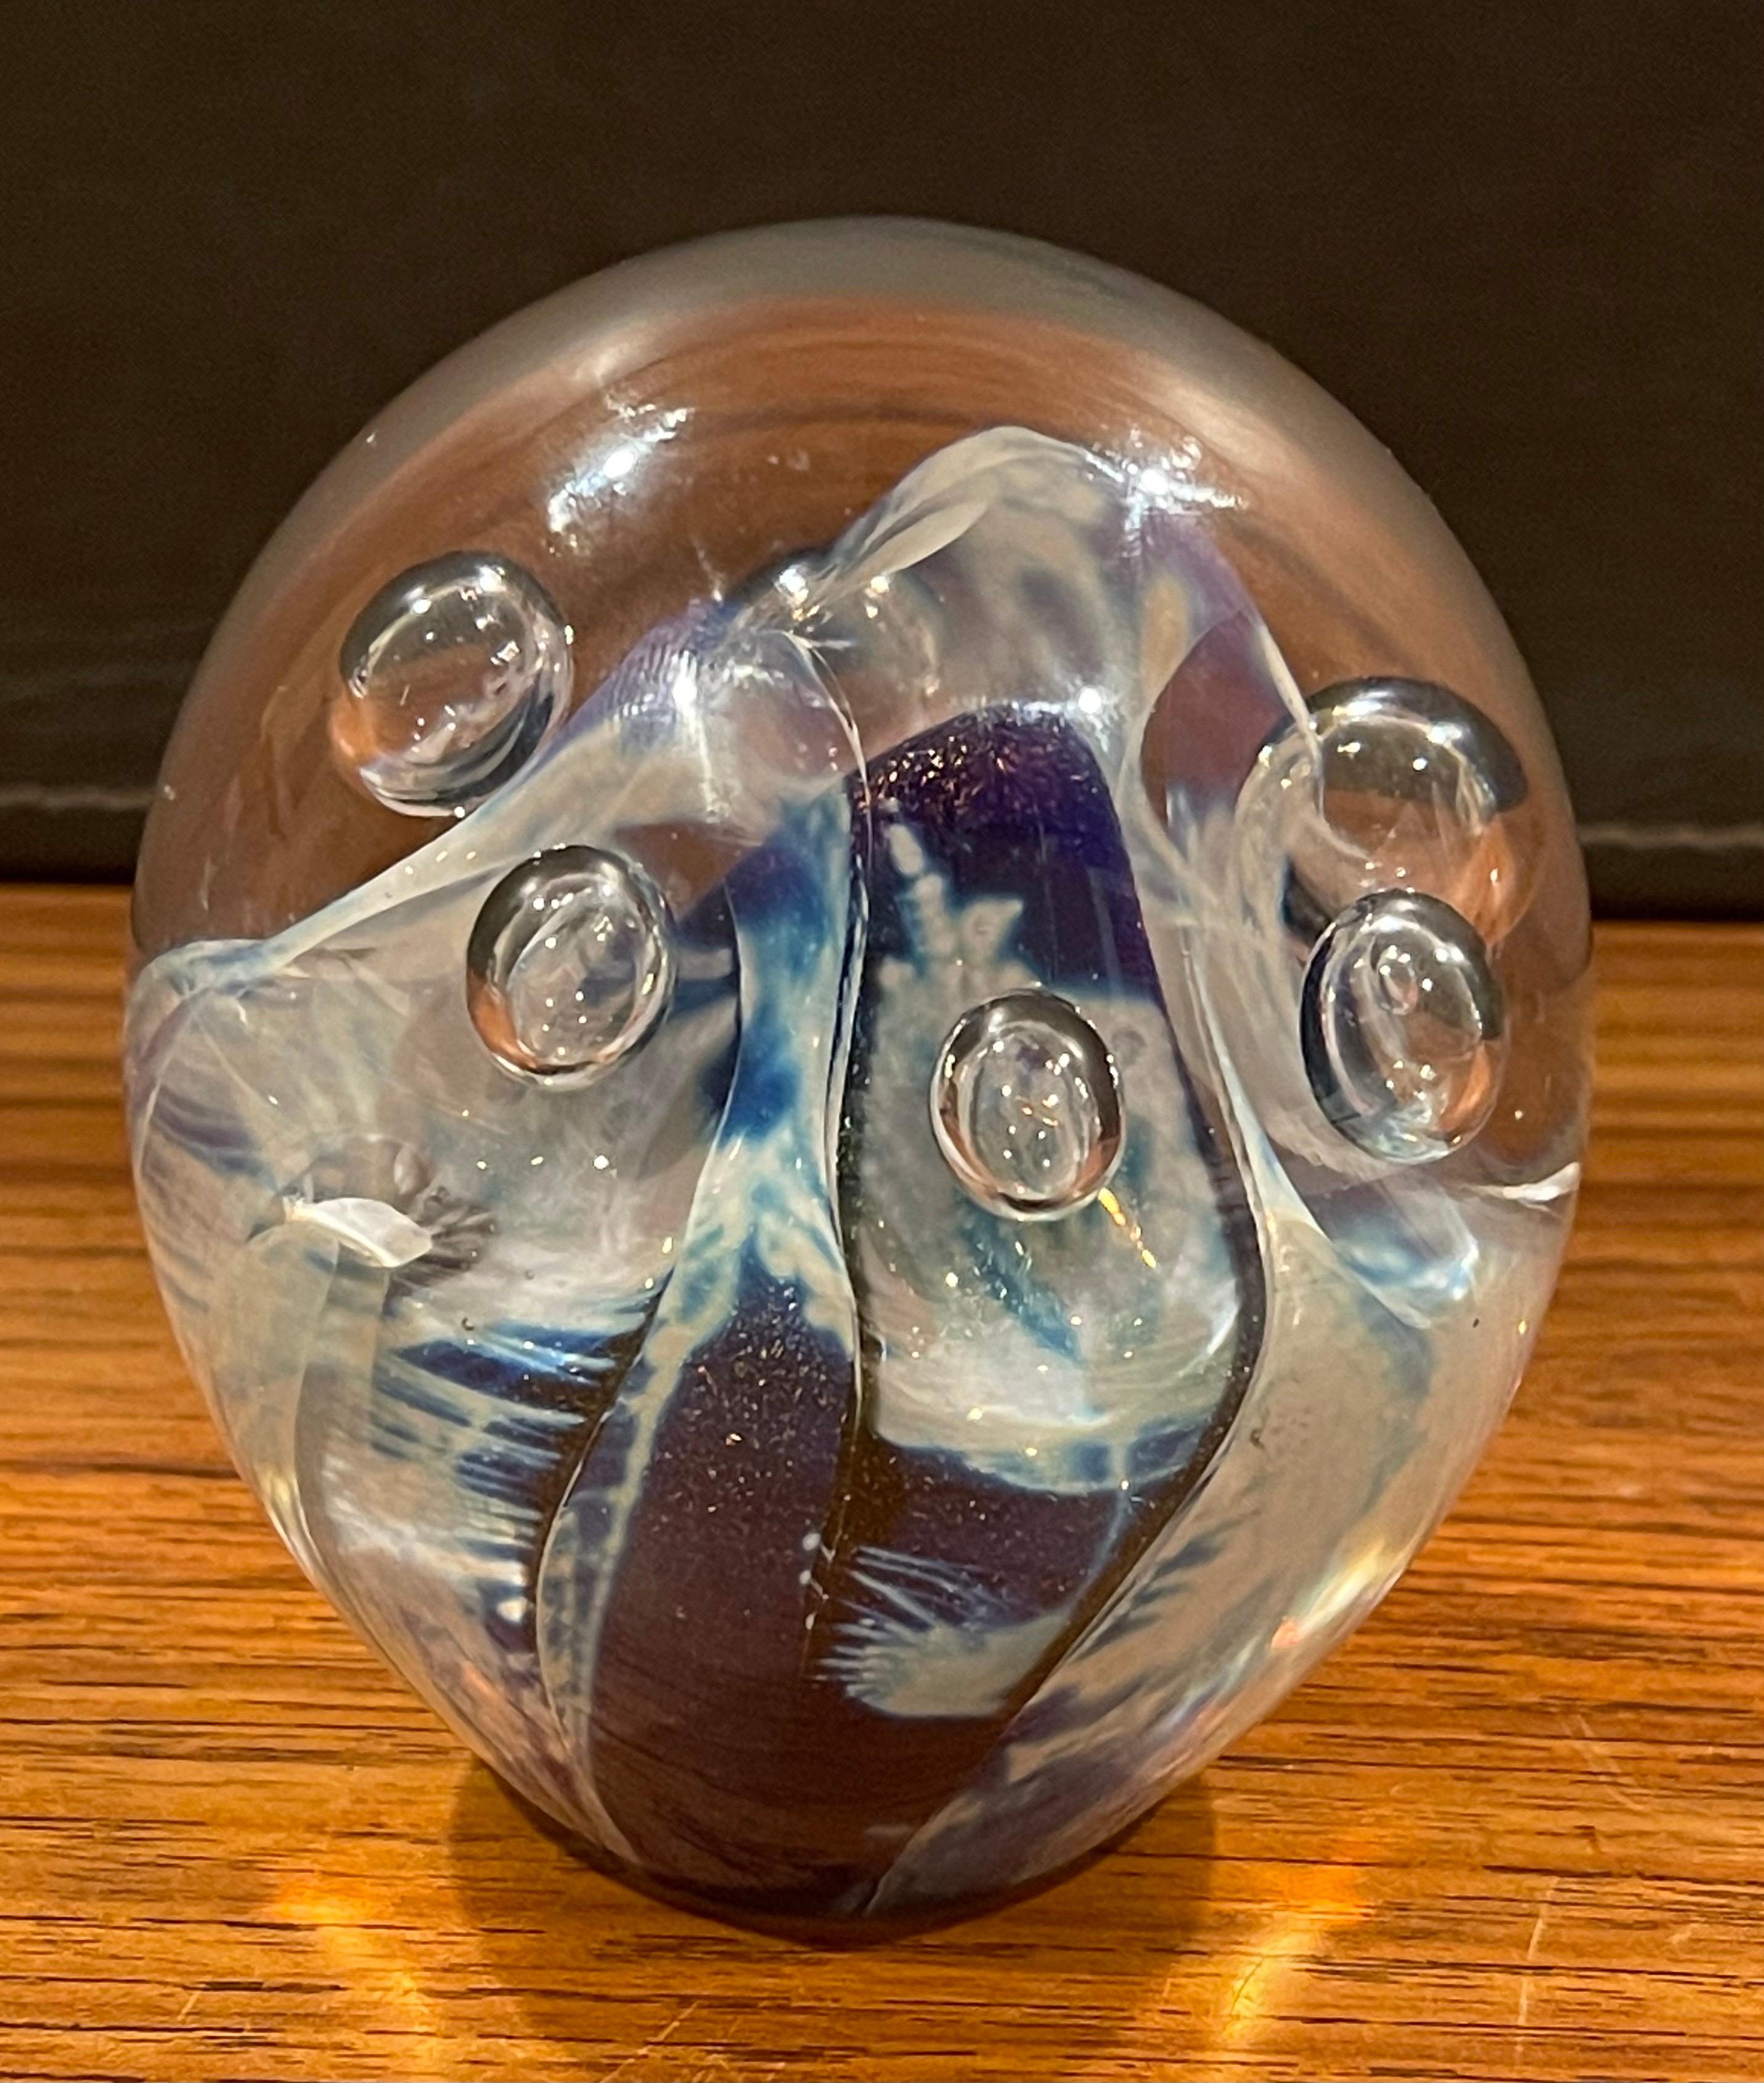 A wonderful art glass orb sculpture or paperweight by Robert Eickholt, circa 1990. The orb is internally layered with white blue swirls and has six internal air bubbles. The piece is signed and dated by the artist on the underside. The orb is in